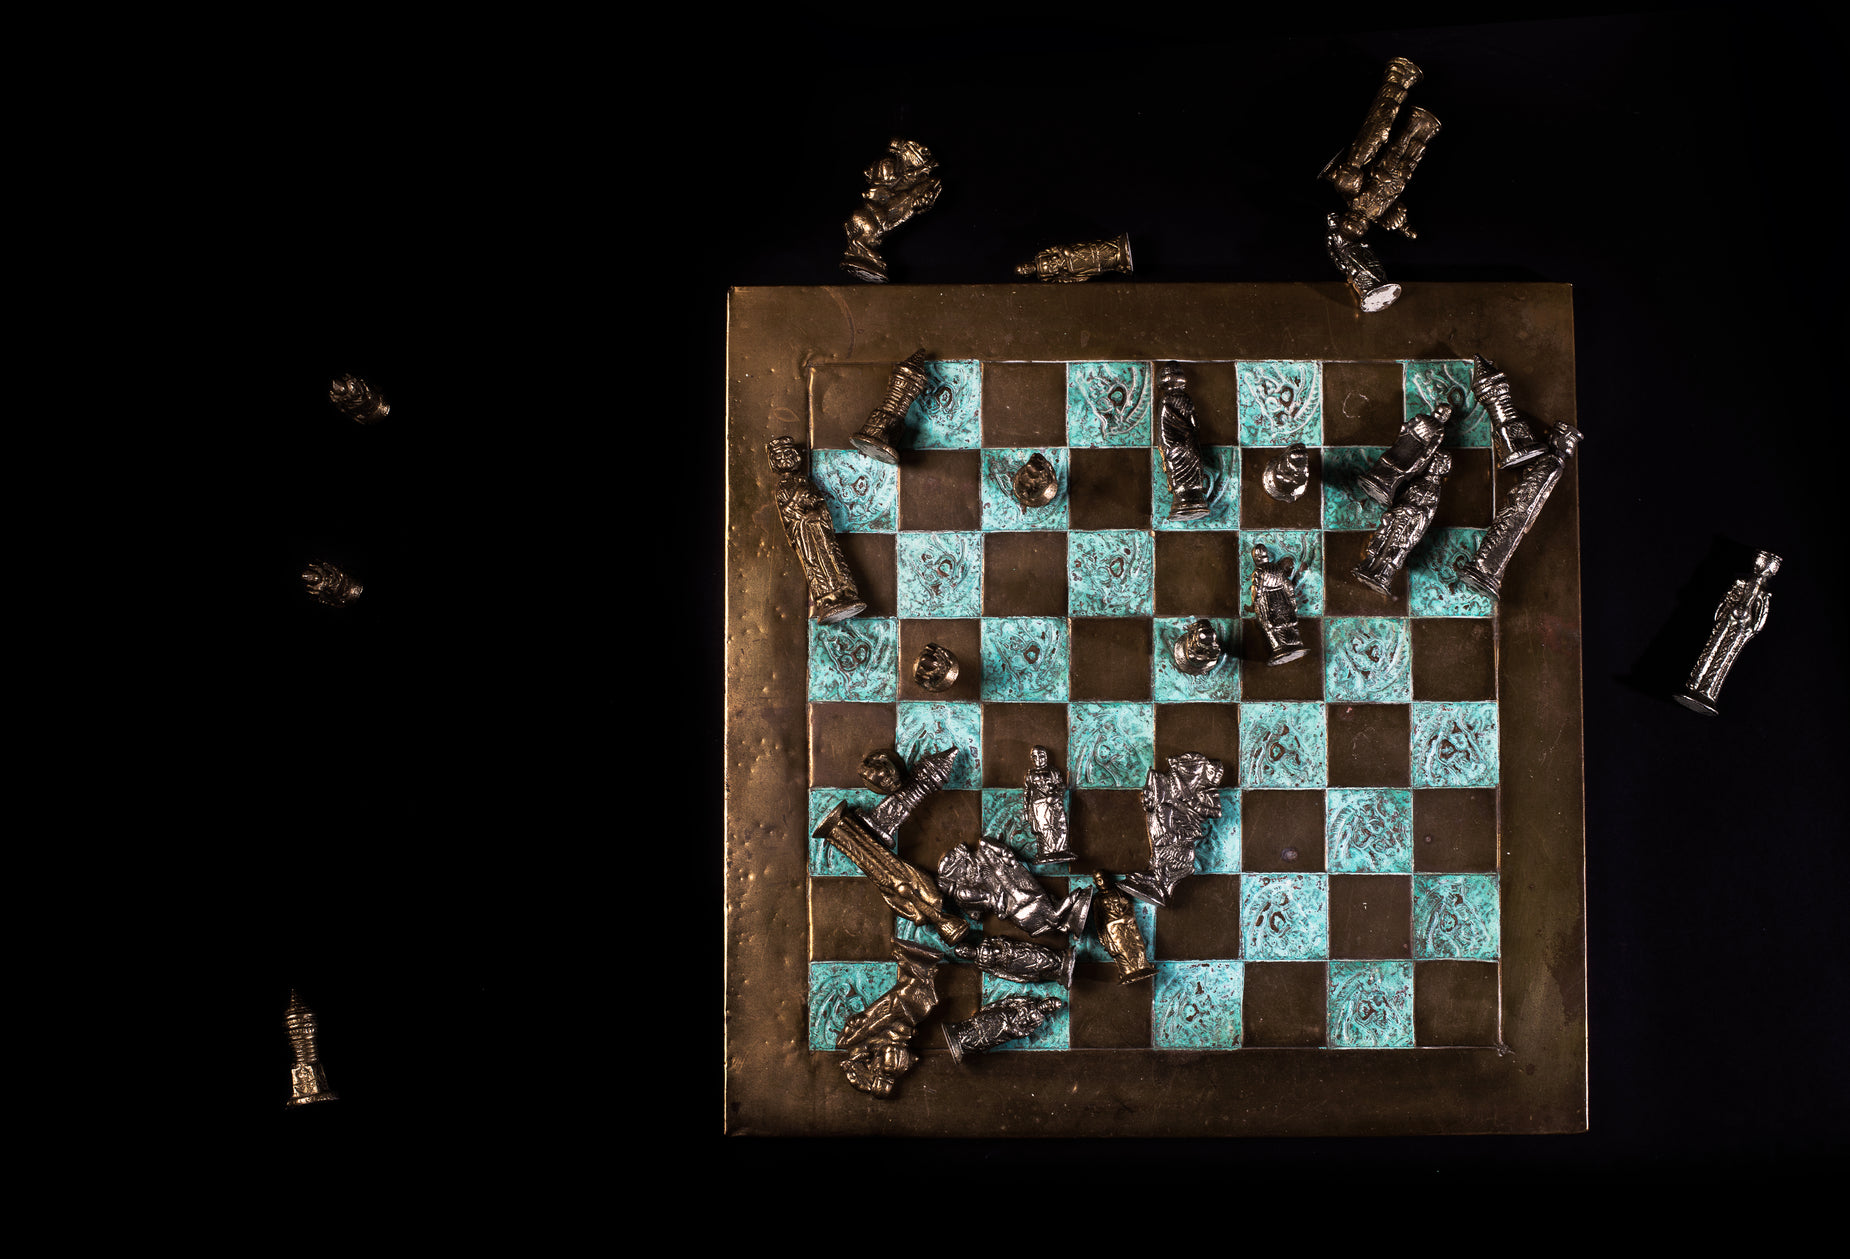 a close up of a chess board with lots of small objects on it